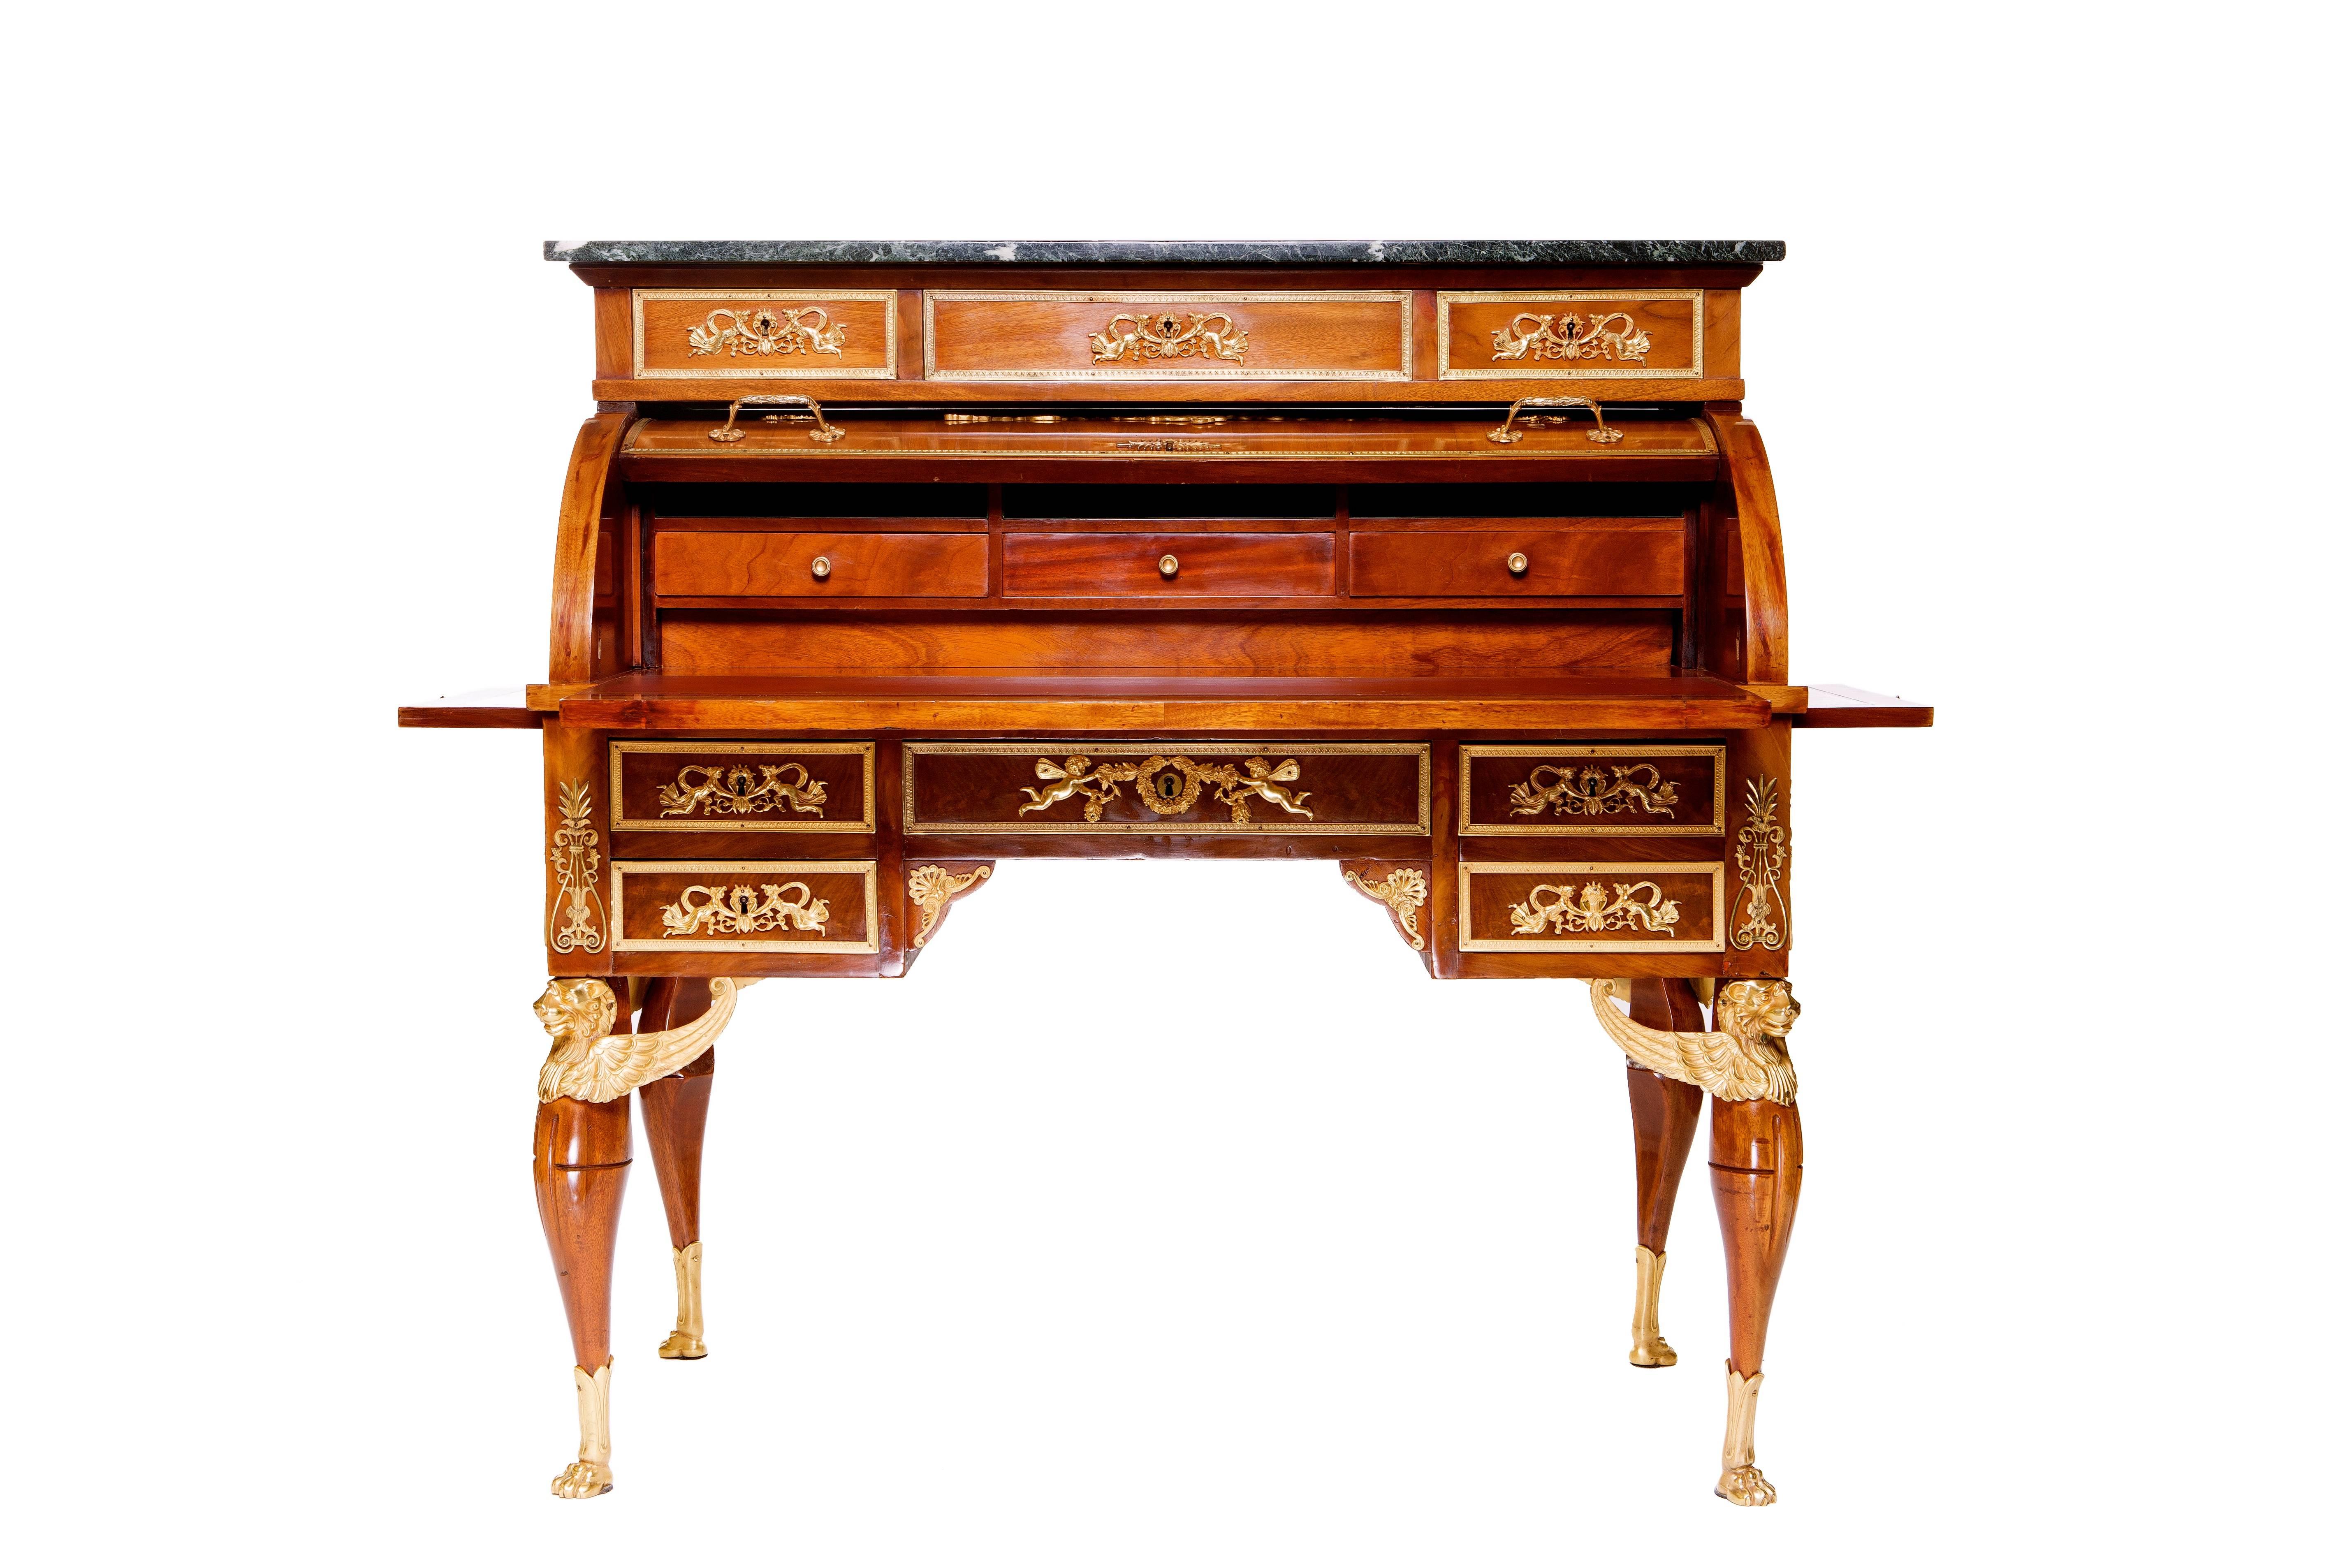 A fine Empire style ormolu-mounted mahogany Cylinder-Bureau. A marble toped rectangular top above one long and two short frieze drawers with ormolu mounts, the cylinder decorated with ormolu mounts on the panel, enclosing three pigeon holes above